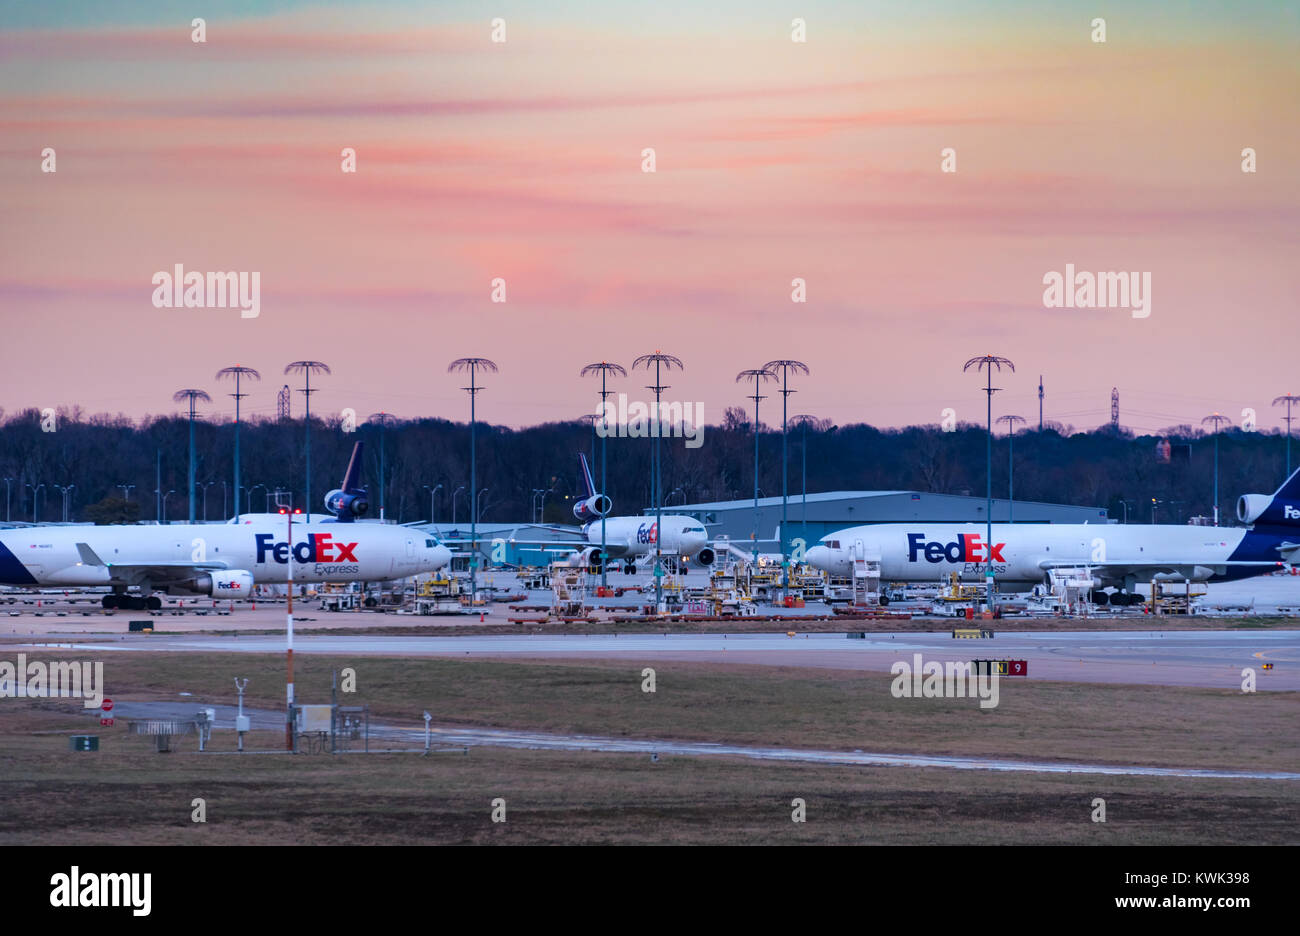 FedEx Express jets at Memphis International Airport, FedEx's world hub, under a colorful sunset sky. (USA) Stock Photo